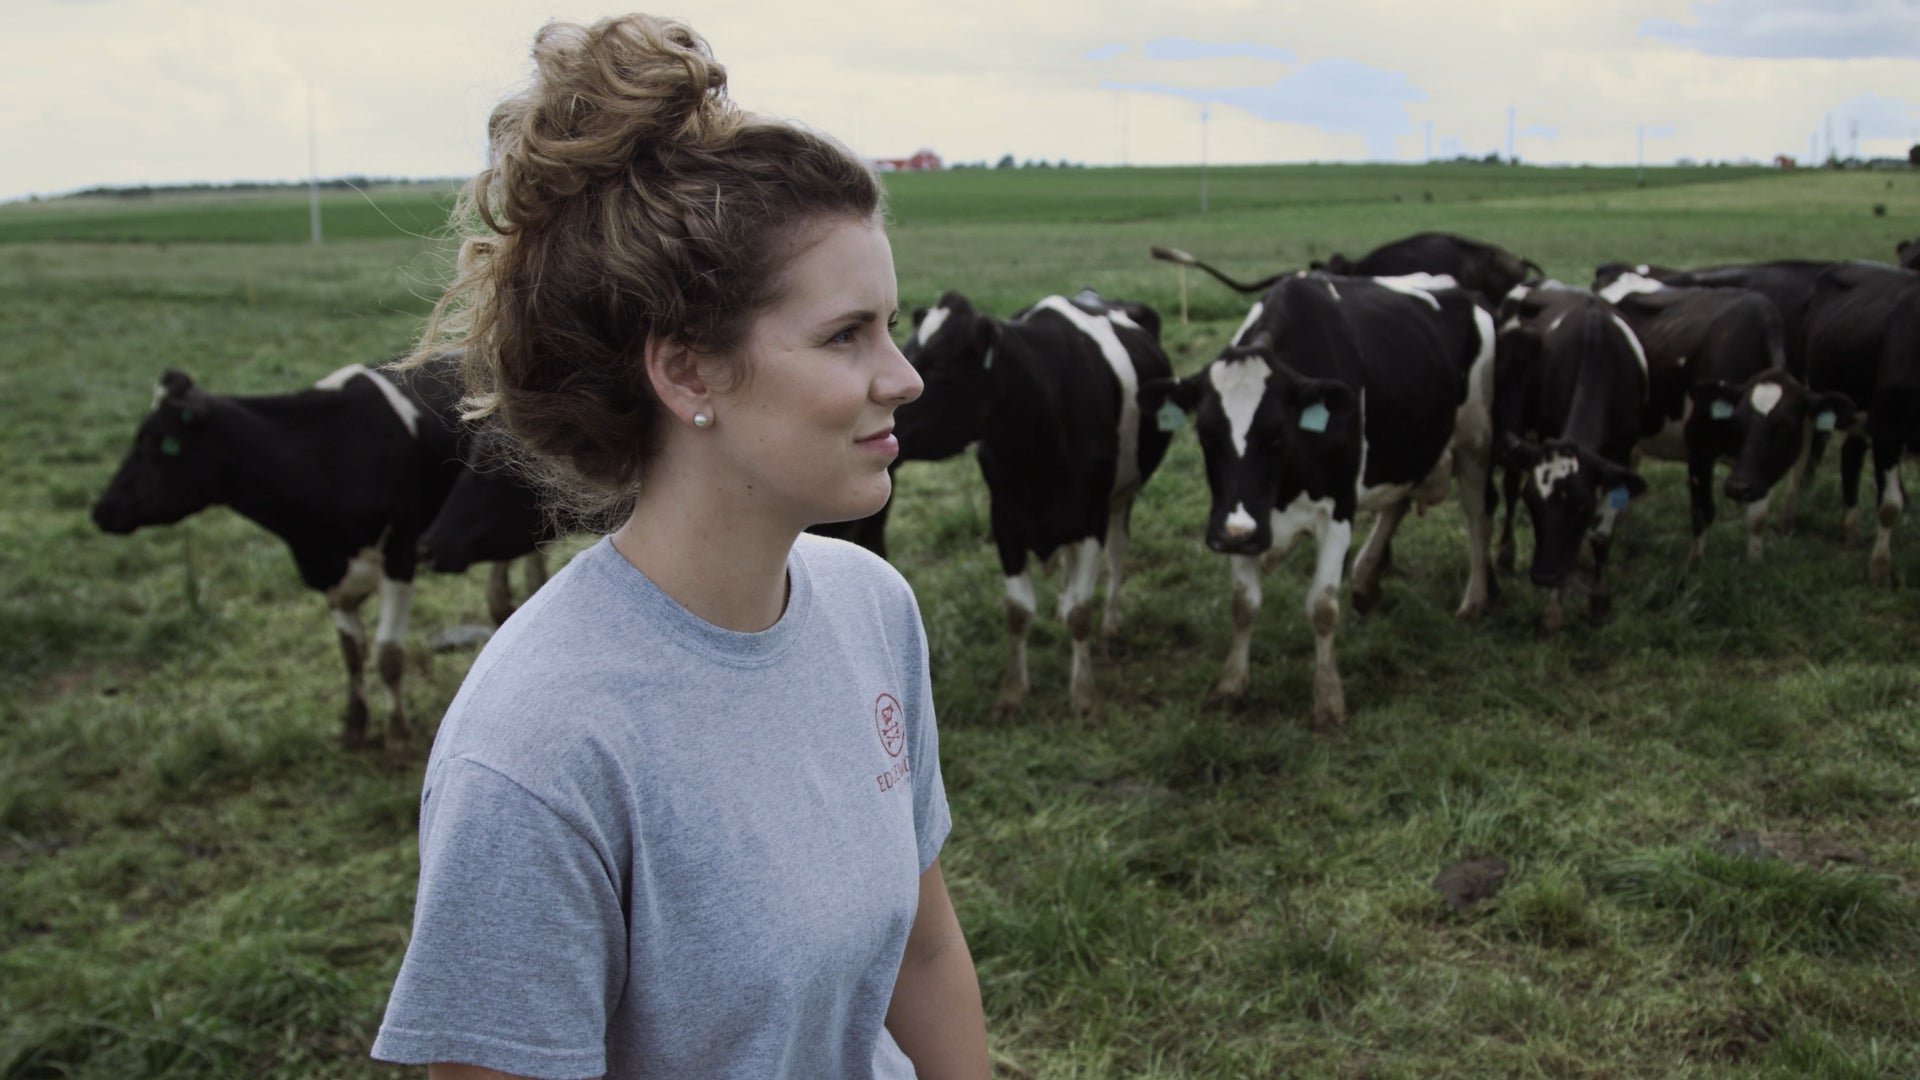 Watch Women Who Farm Episodes And Clips Online AGDAILY